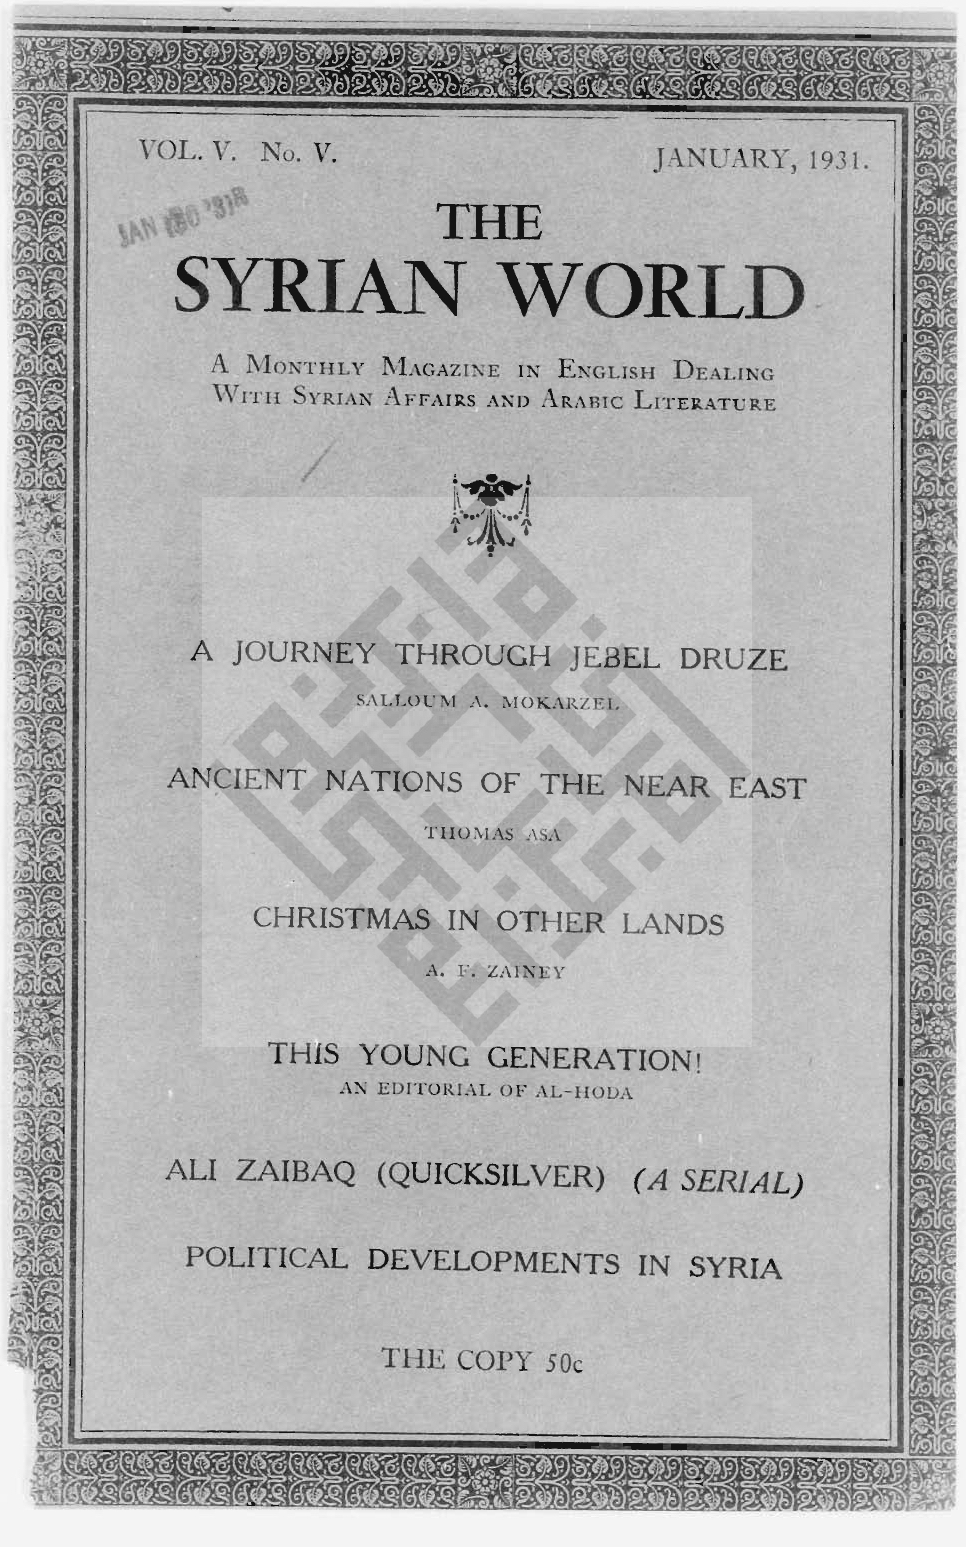 A Marvel and a Riddle, The Syrian World, 5, 5, January 1931